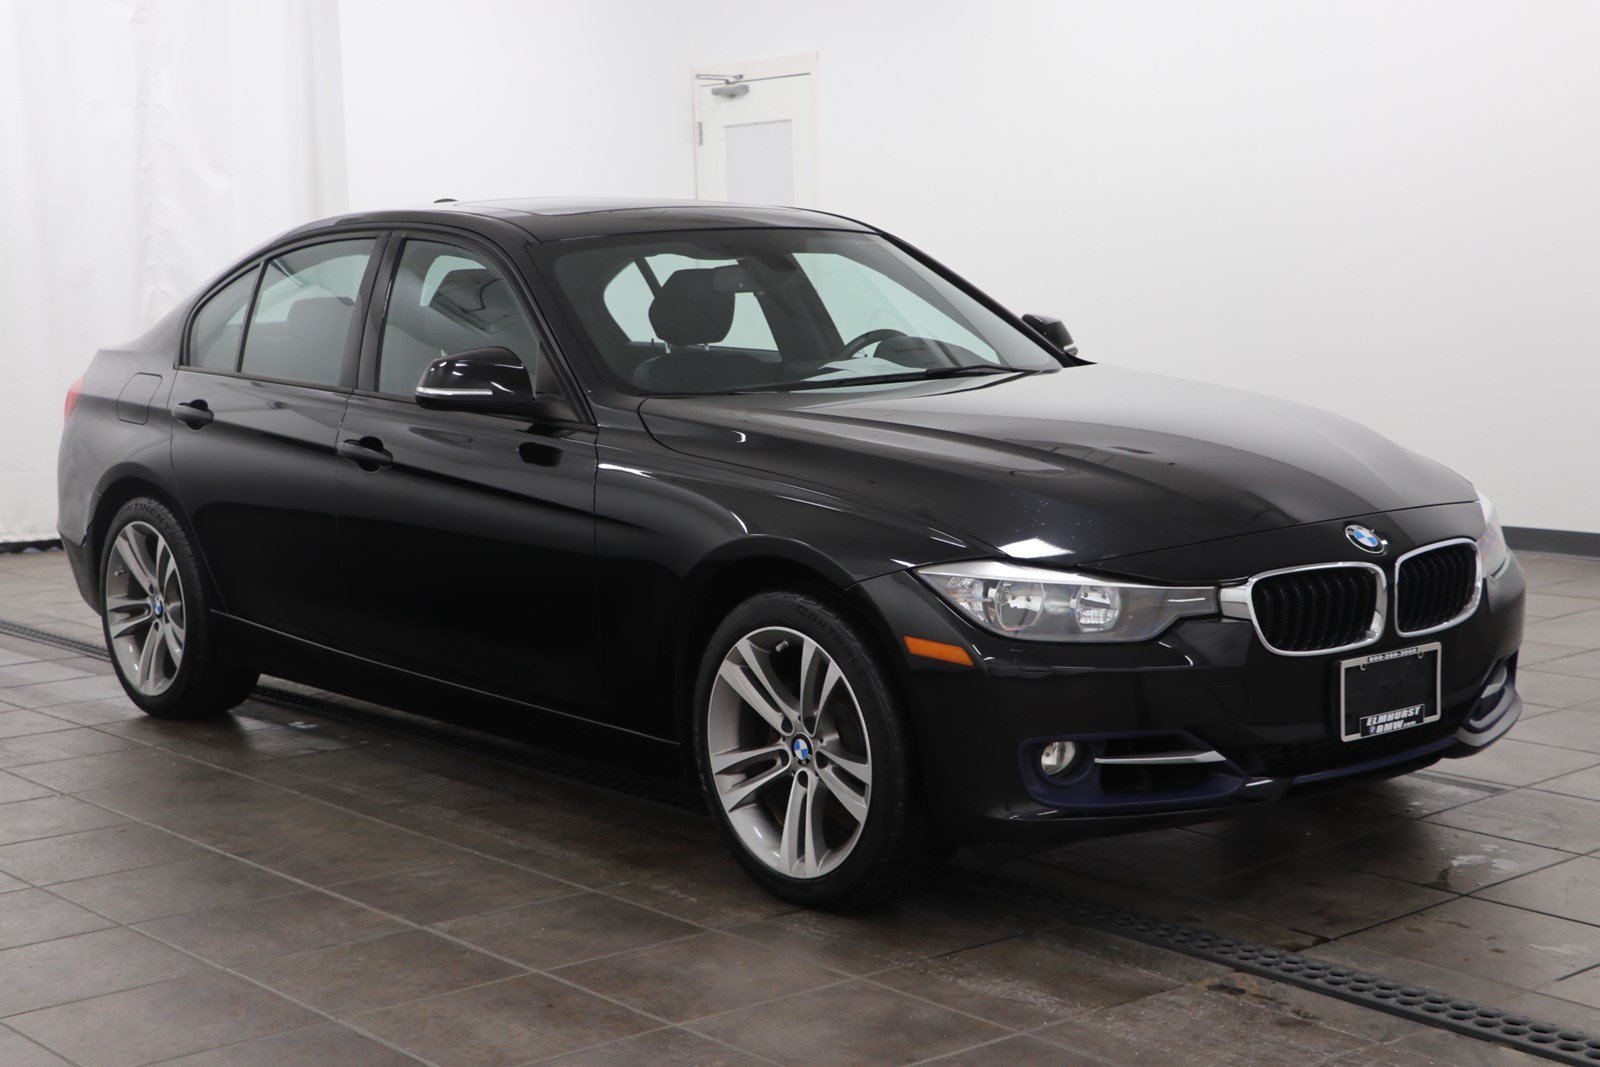 PreOwned 2015 BMW 3 Series 328i xDrive 4dr Car in